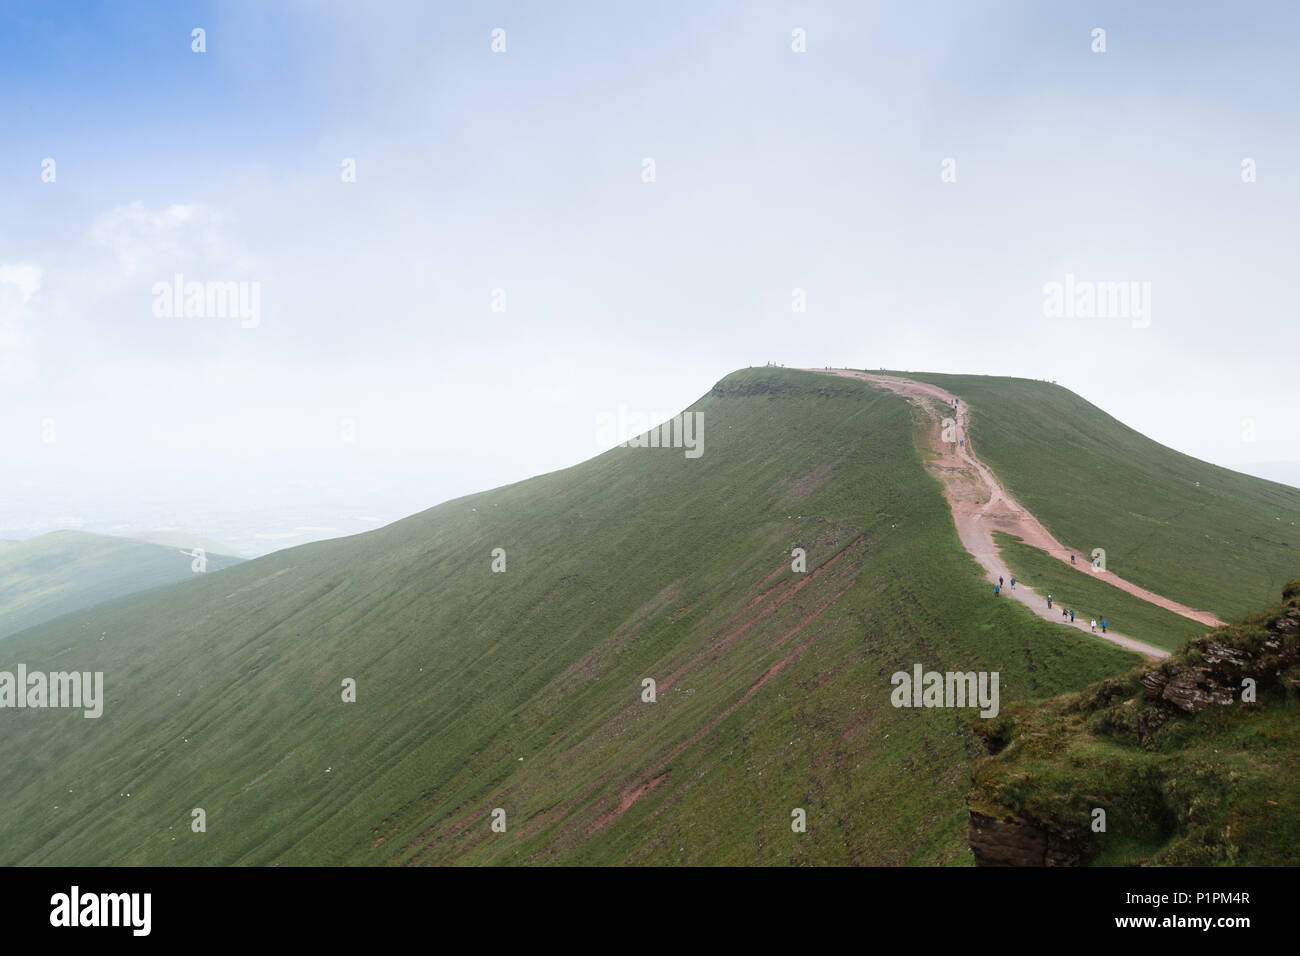 Pen Y Fan - the tallest mountain in the UK south of Snowdonia. Wales, UK. Stock Photo